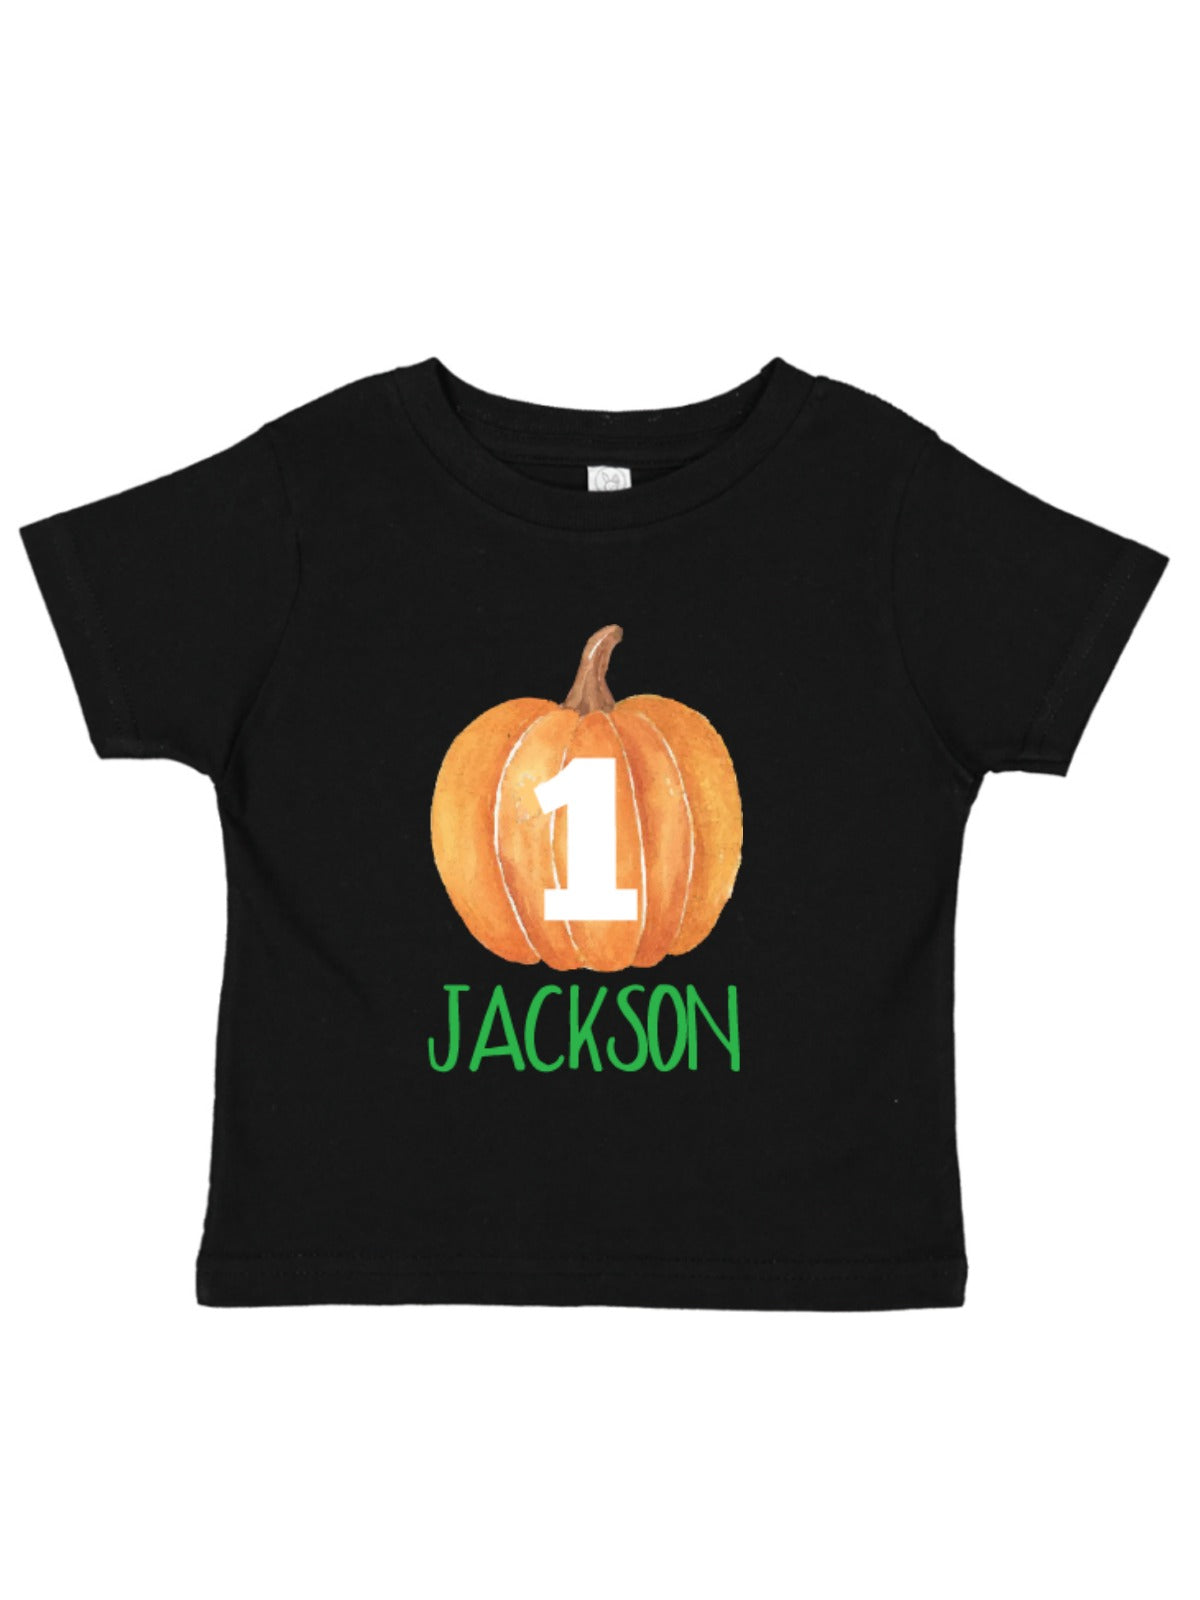 personalized name and age pumpkin birthday shirt